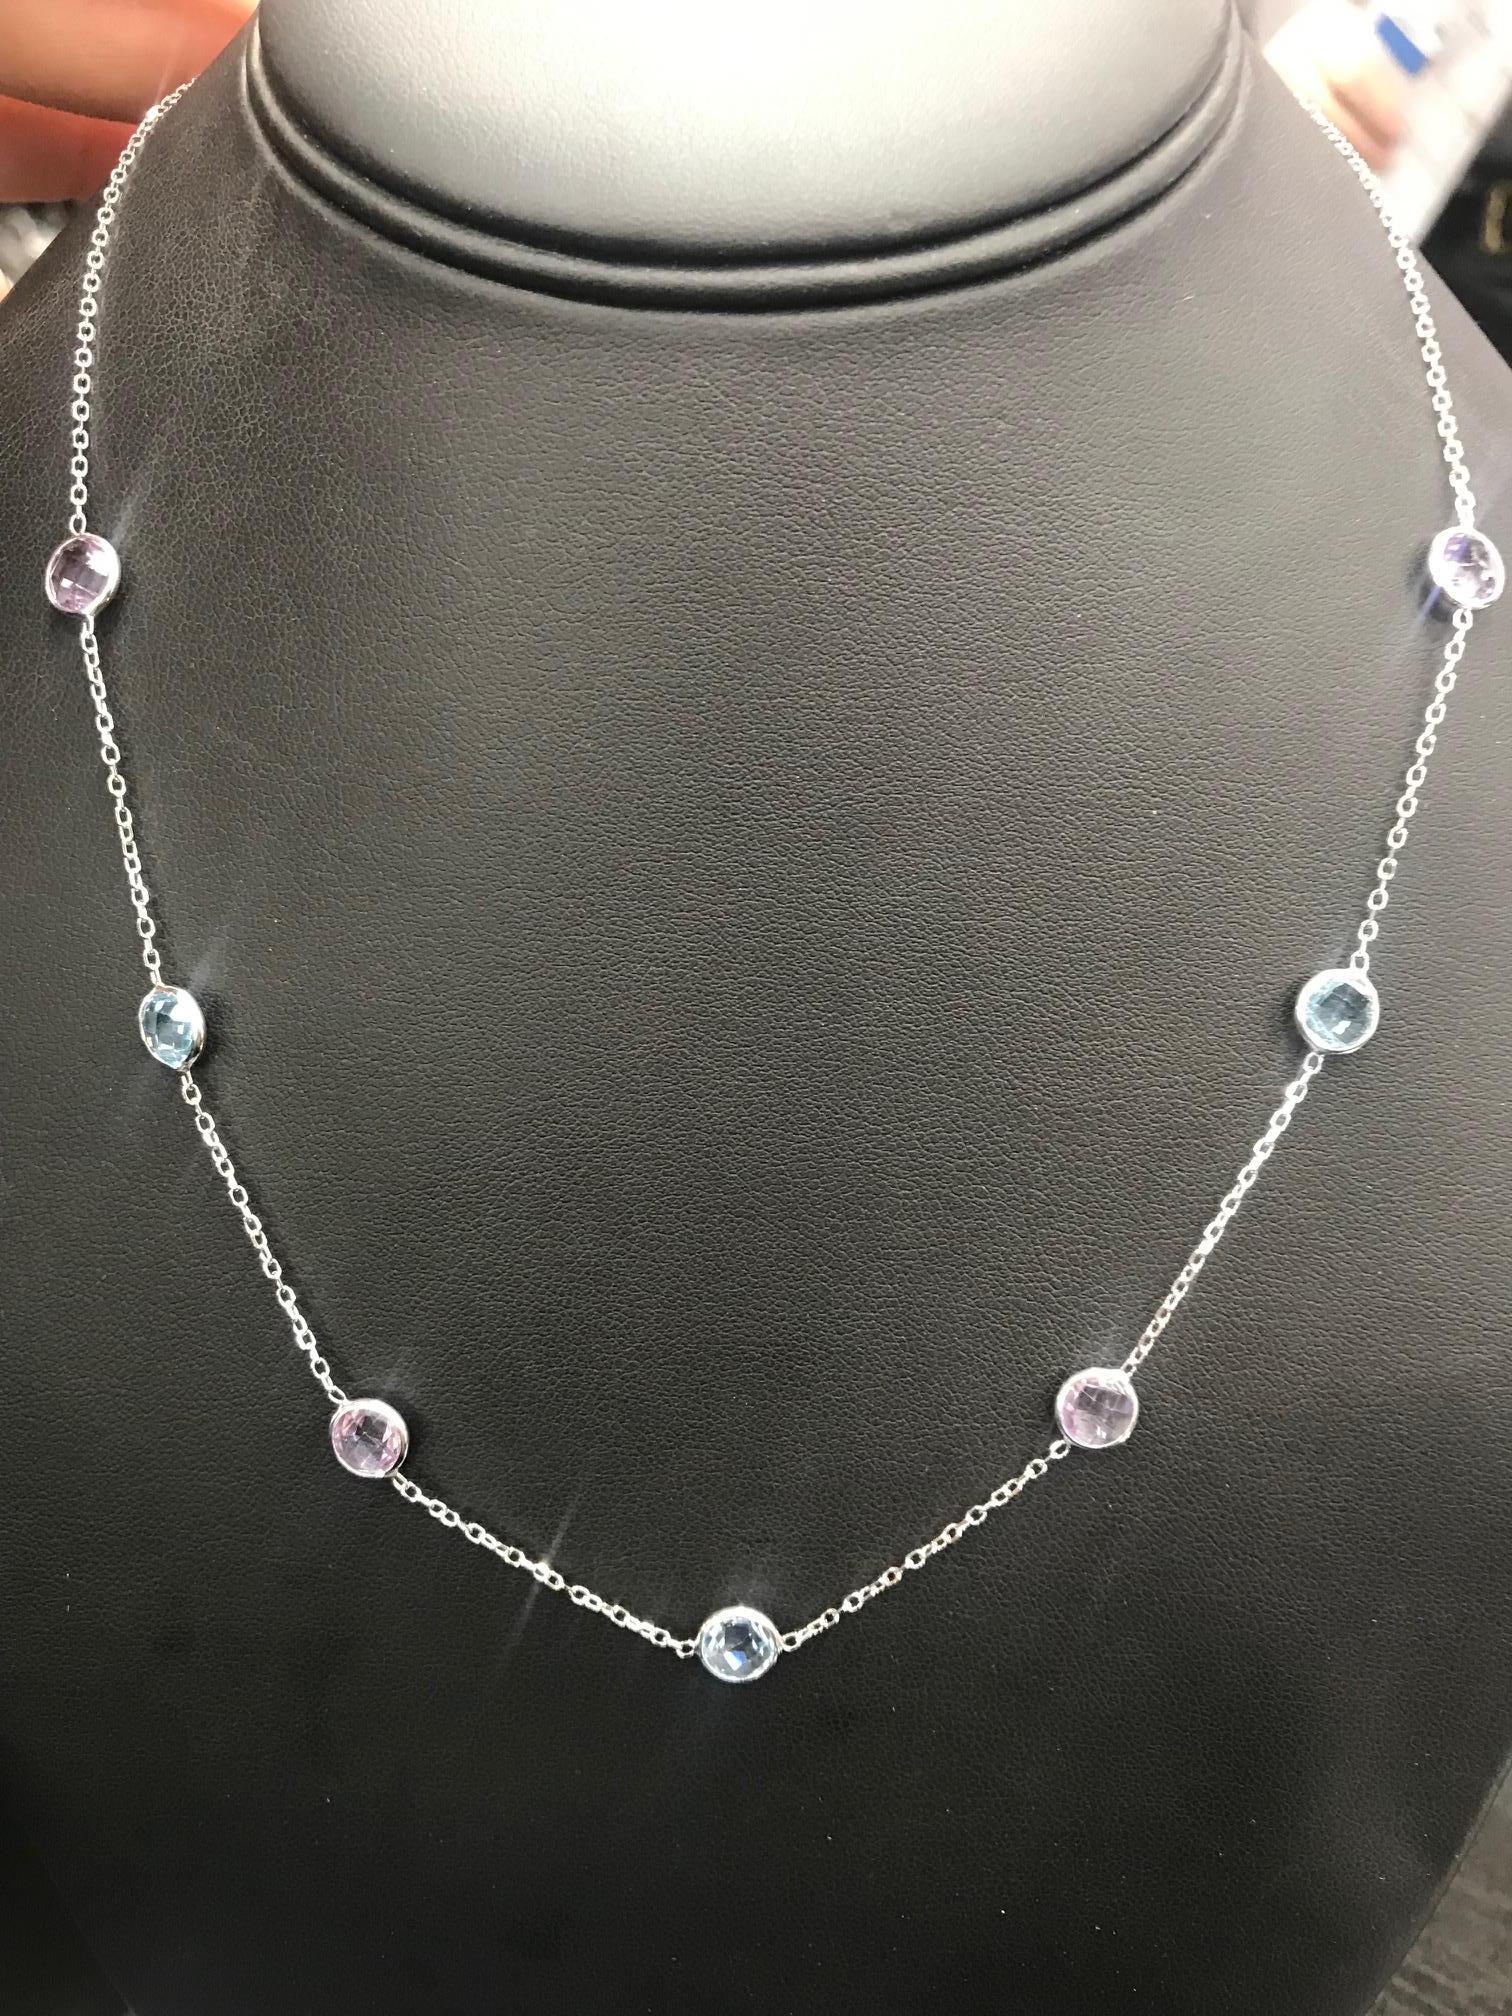 14K White gold neclace featuring 5 blue topaz and 5 purple amethyst in a bezel setting. 